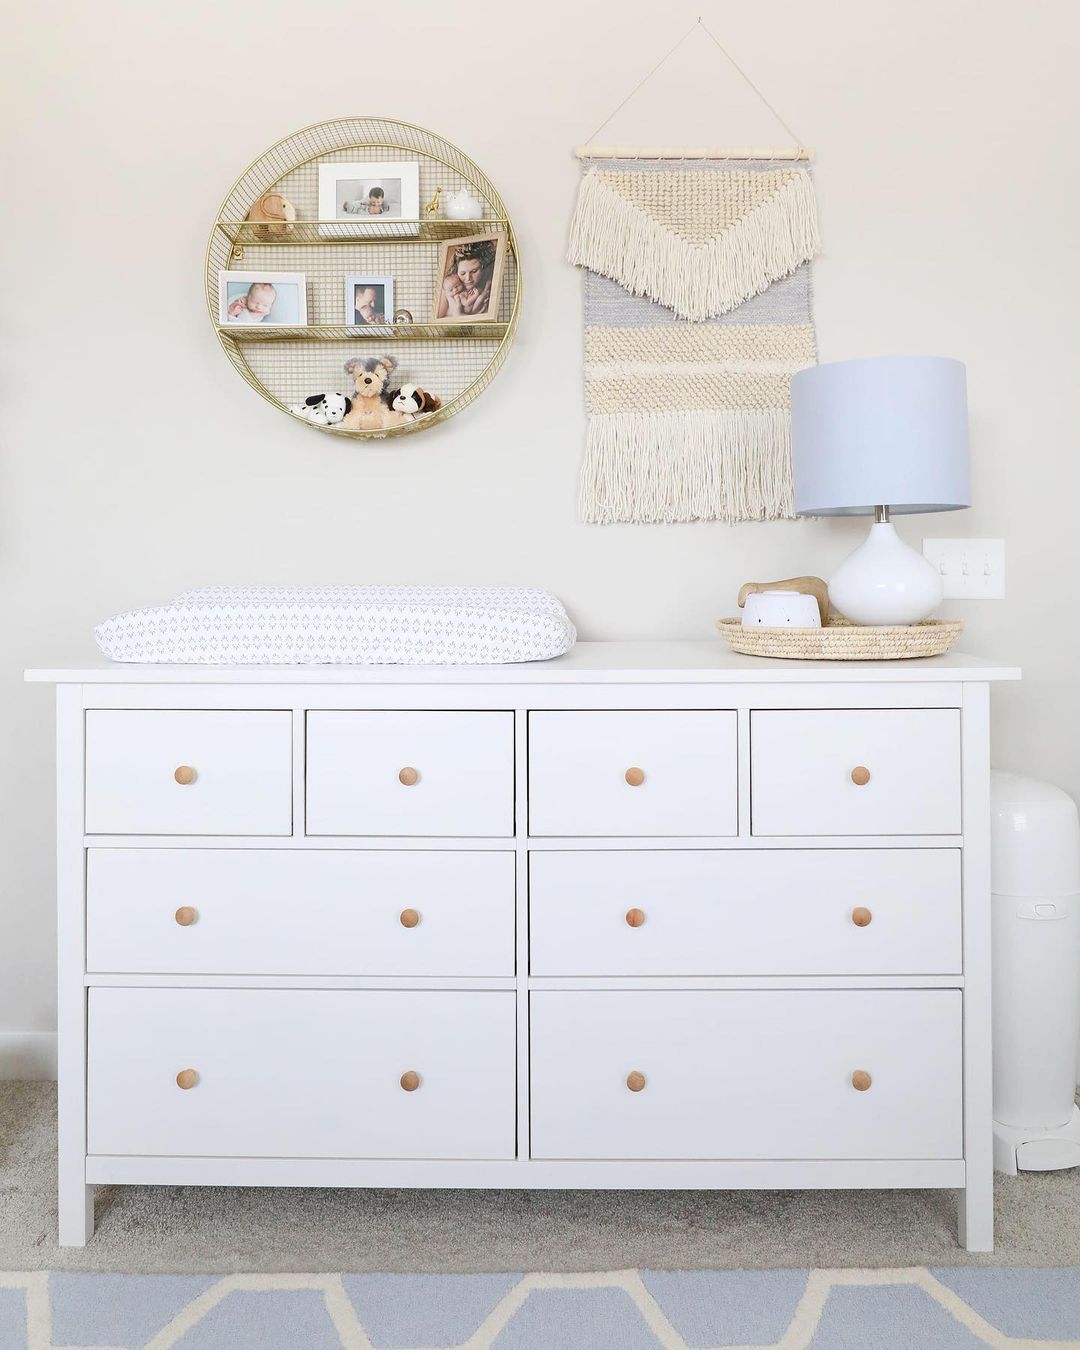 White dresser with changing pad and minimal decor. Photo by Instagram user @twotwentyone